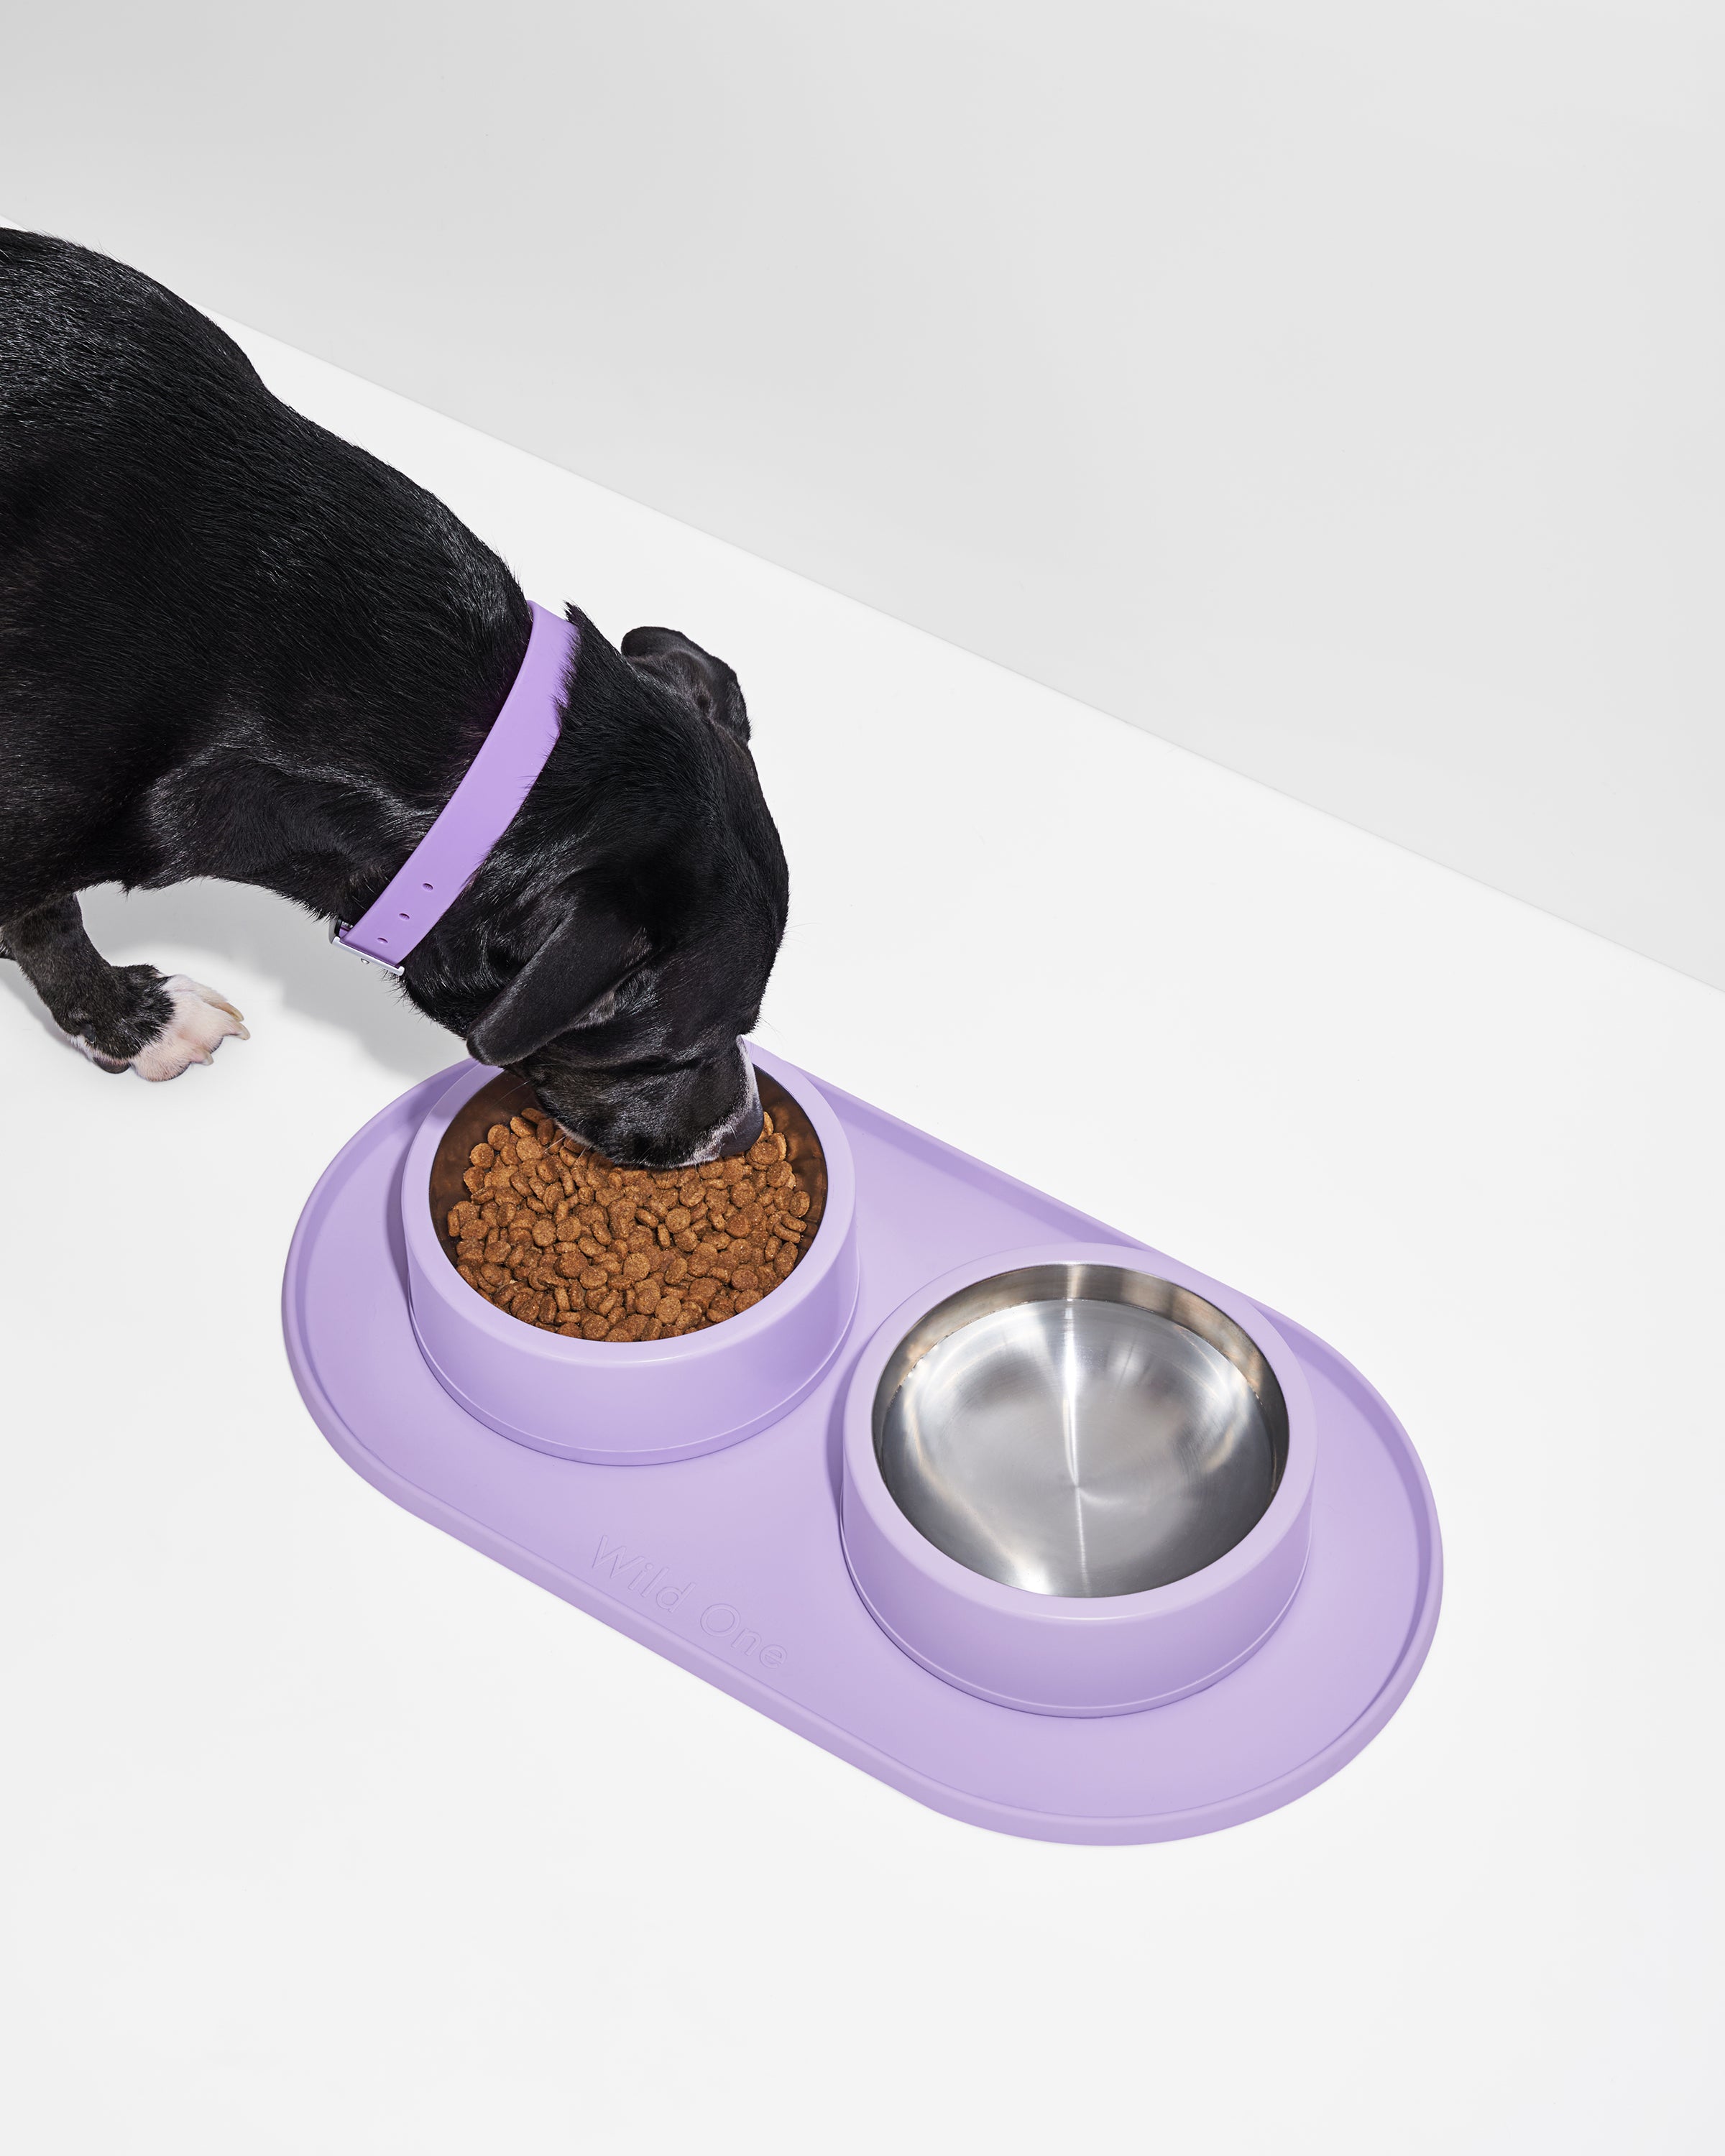 Dog Bowl Mat, Silicone Waterproof Mat for Water Bowl & Food Bowl, Protect  Floors Contain Messes, Aesthetic Dog Mat 